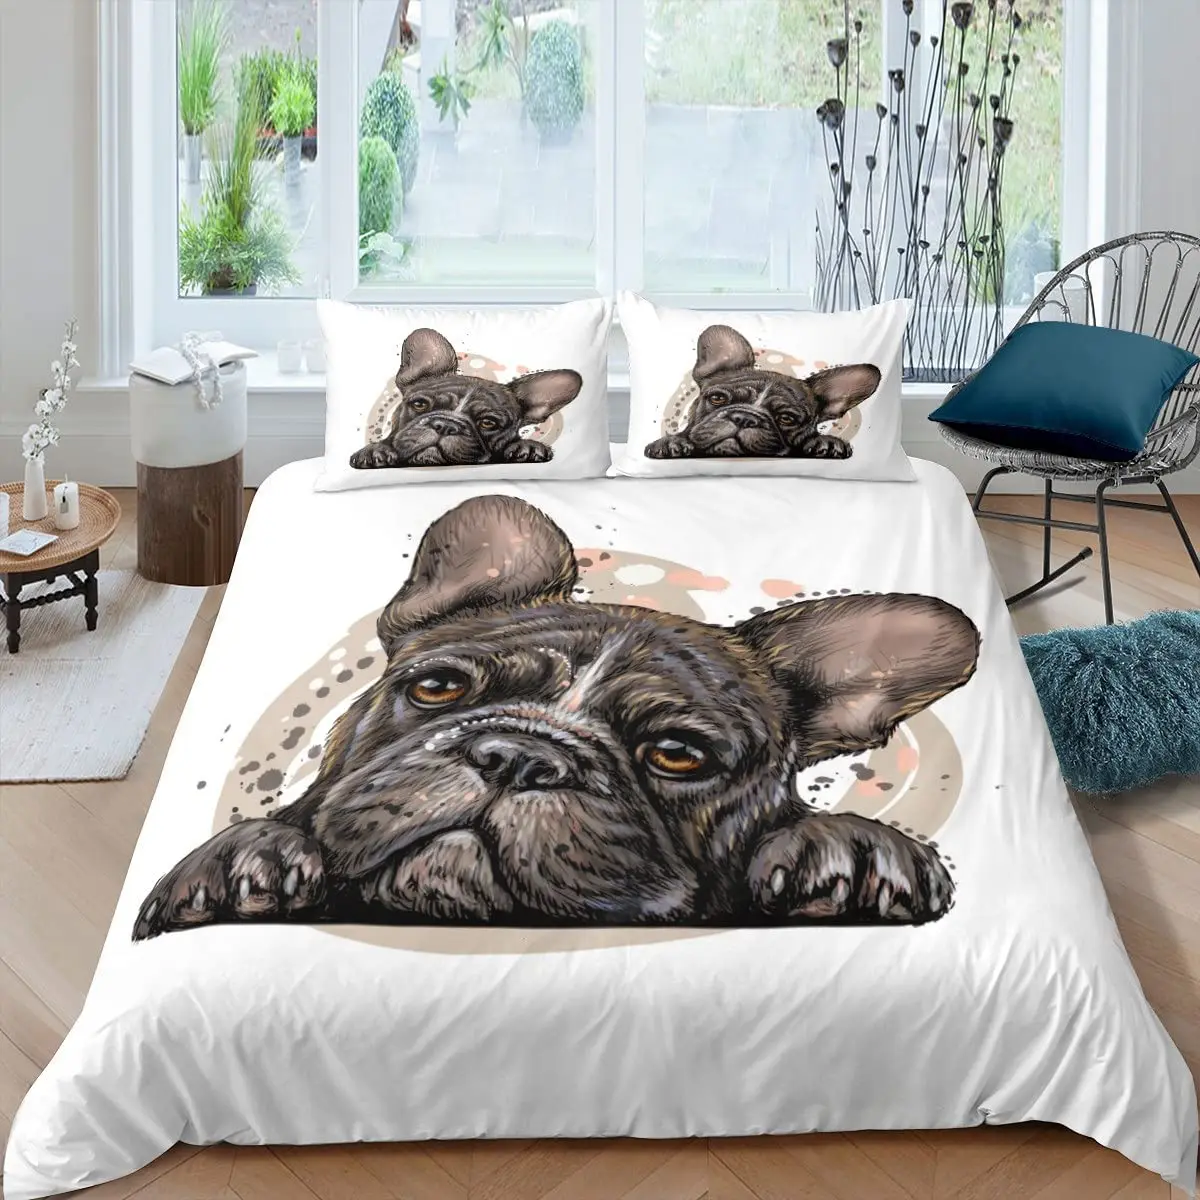 

Bulldog Duvet Cover French Bulldogs Bedding Set Twin Polyester Chocolate Puppy Pet Doggy Animal Quilt Cover For Dog Lover Gifts